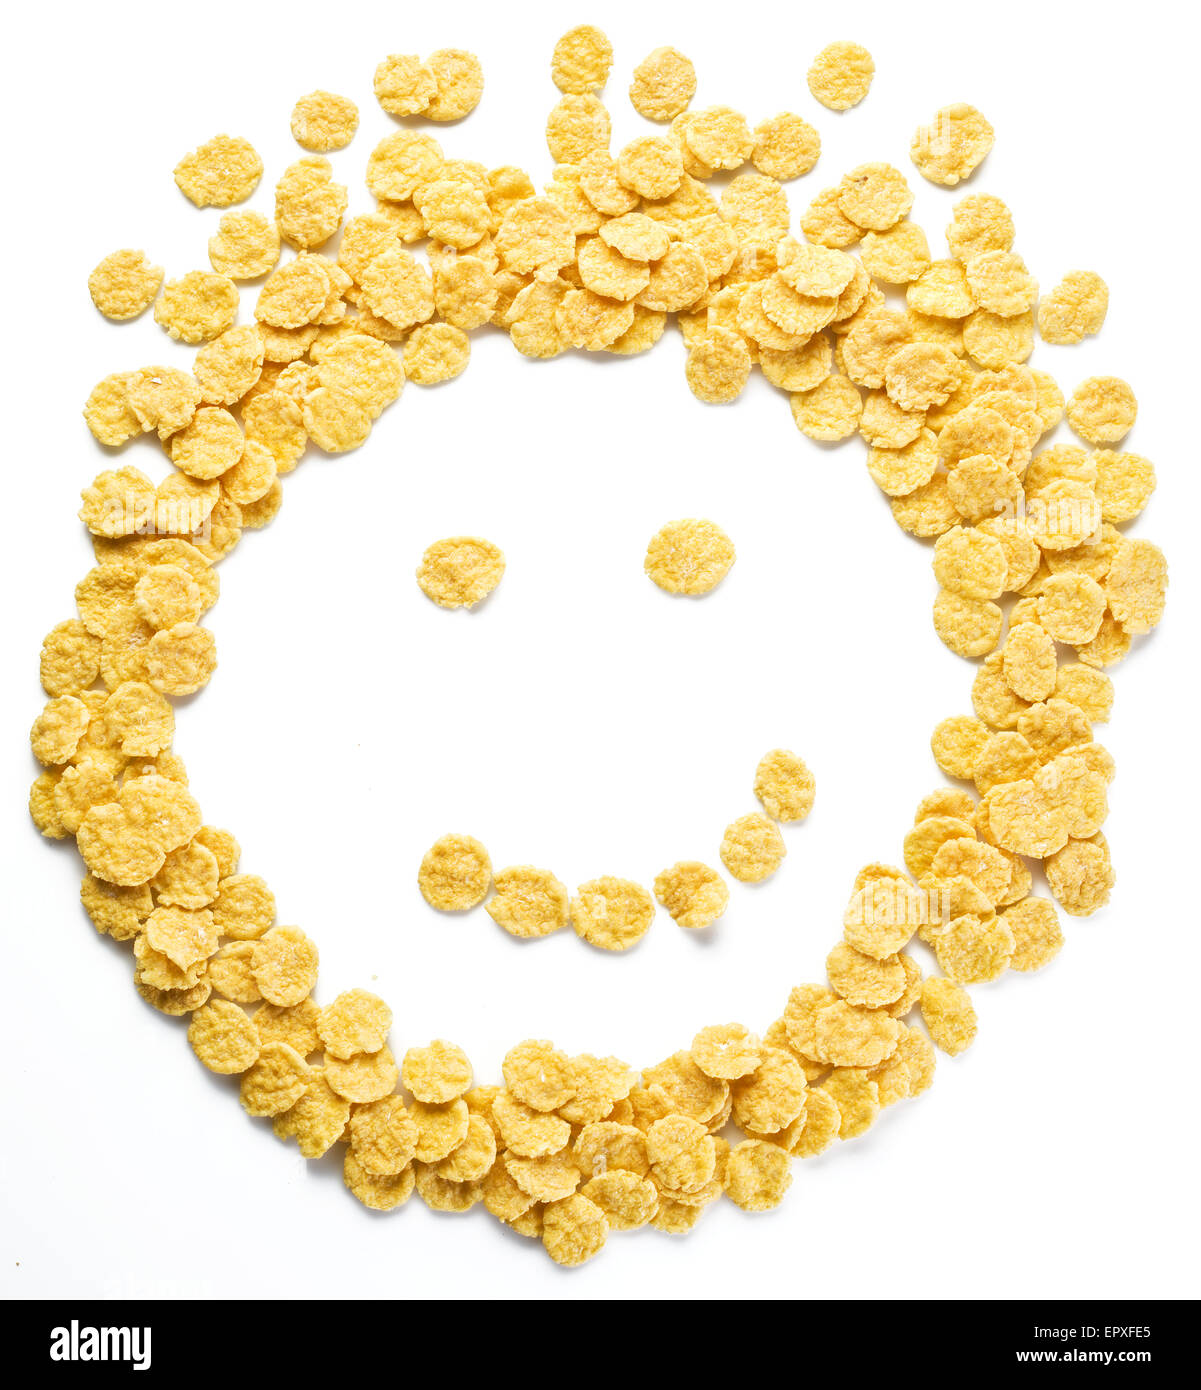 Cornflakes arranged as smiley face on a white background. Stock Photo